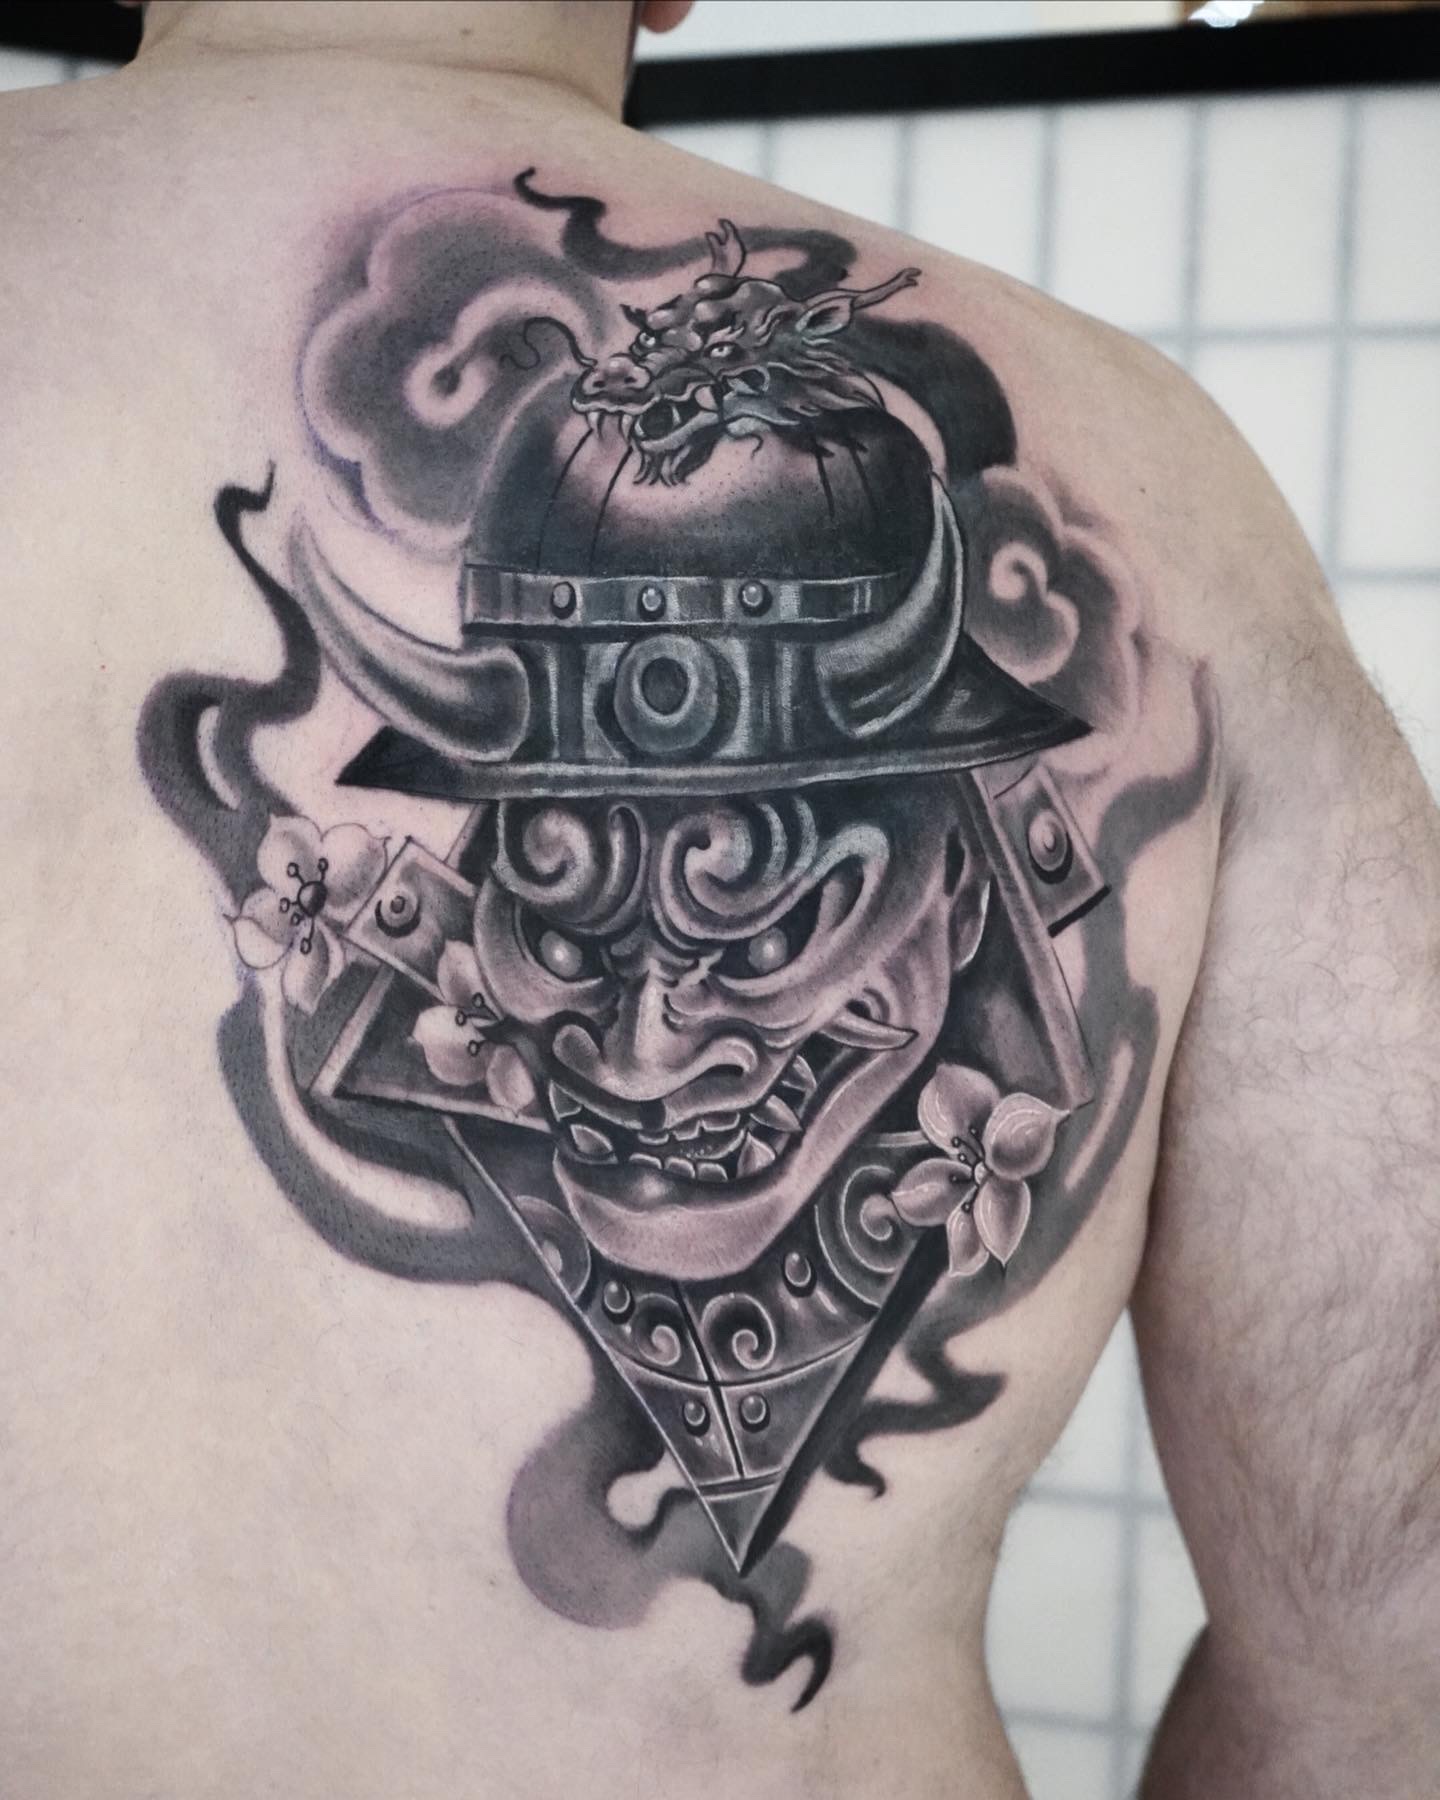 Japanese Inspires Warrior Mask Coverup Tattoo - Tattoo Abyss Montreal